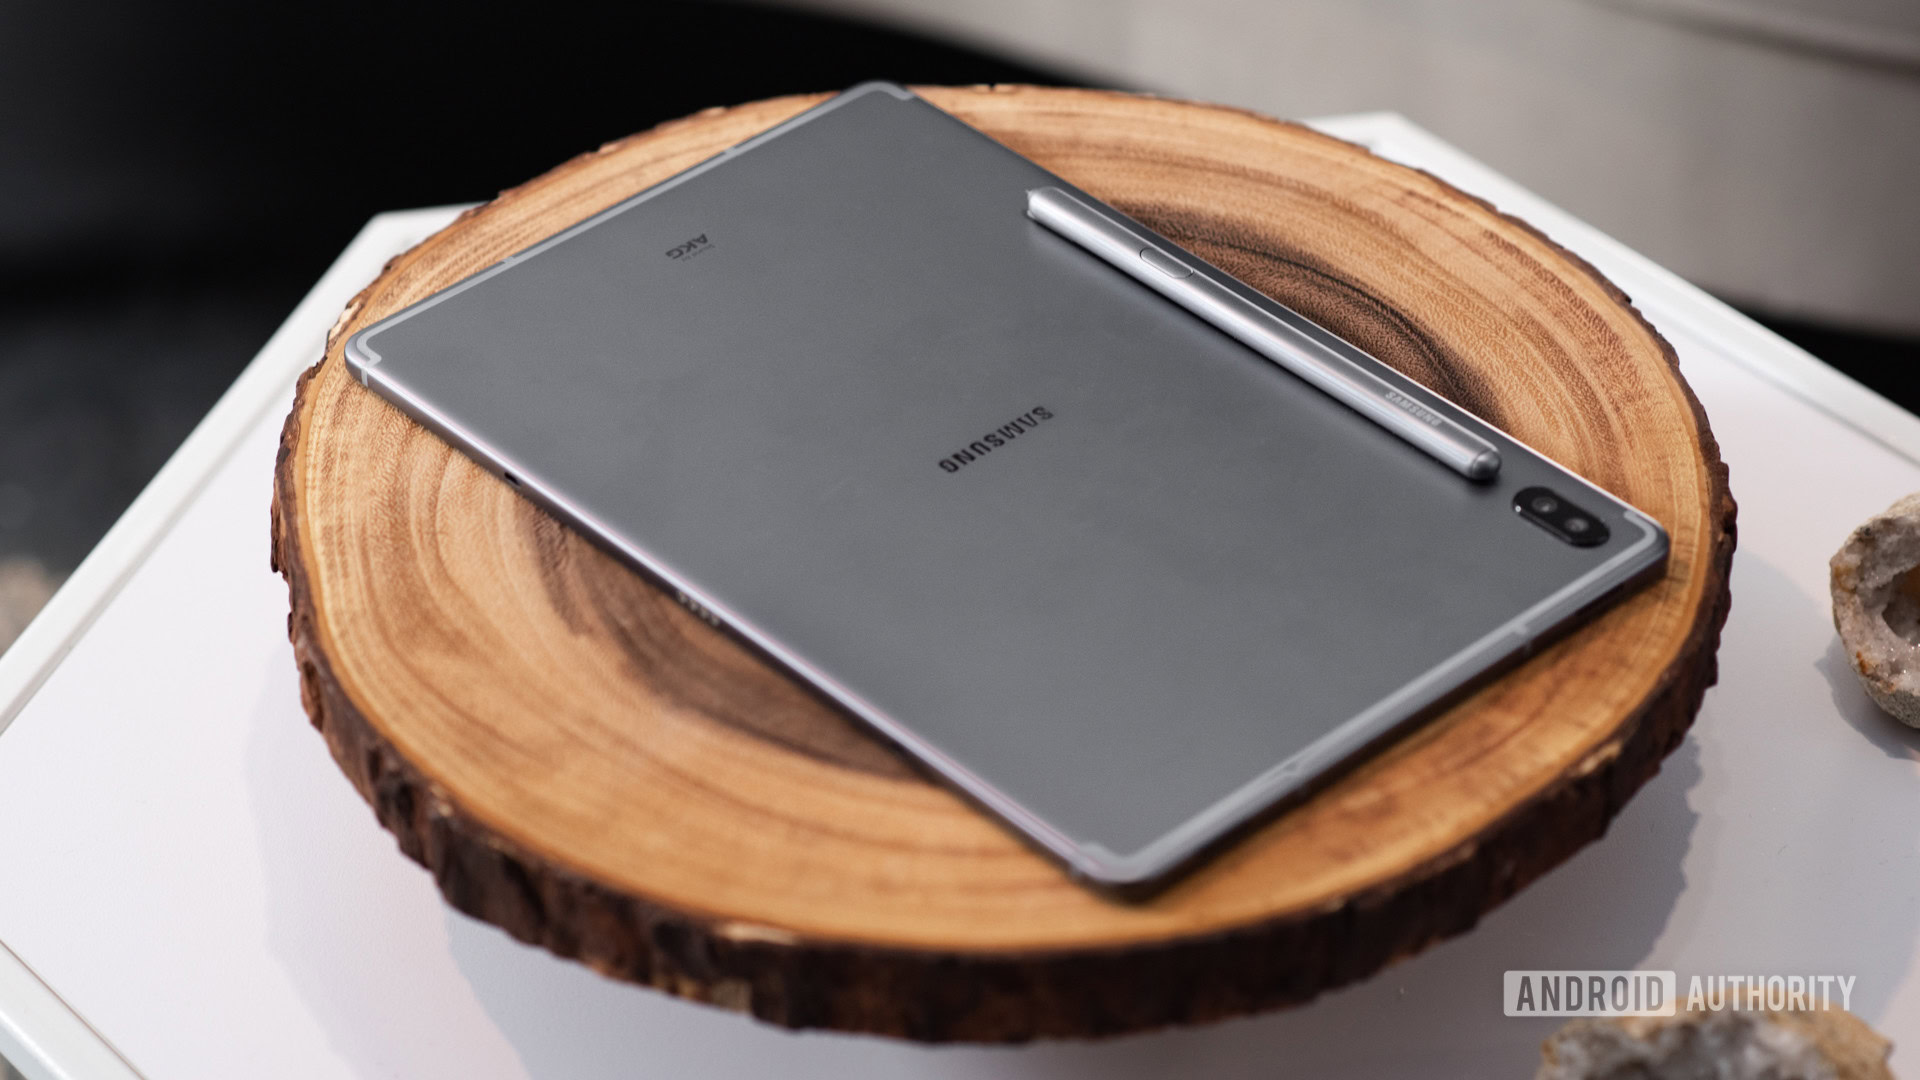 https://www.androidauthority.com/wp-content/uploads/2019/07/Samsung-Galaxy-Tab-S6-on-table-with-S-Pen-2.jpg